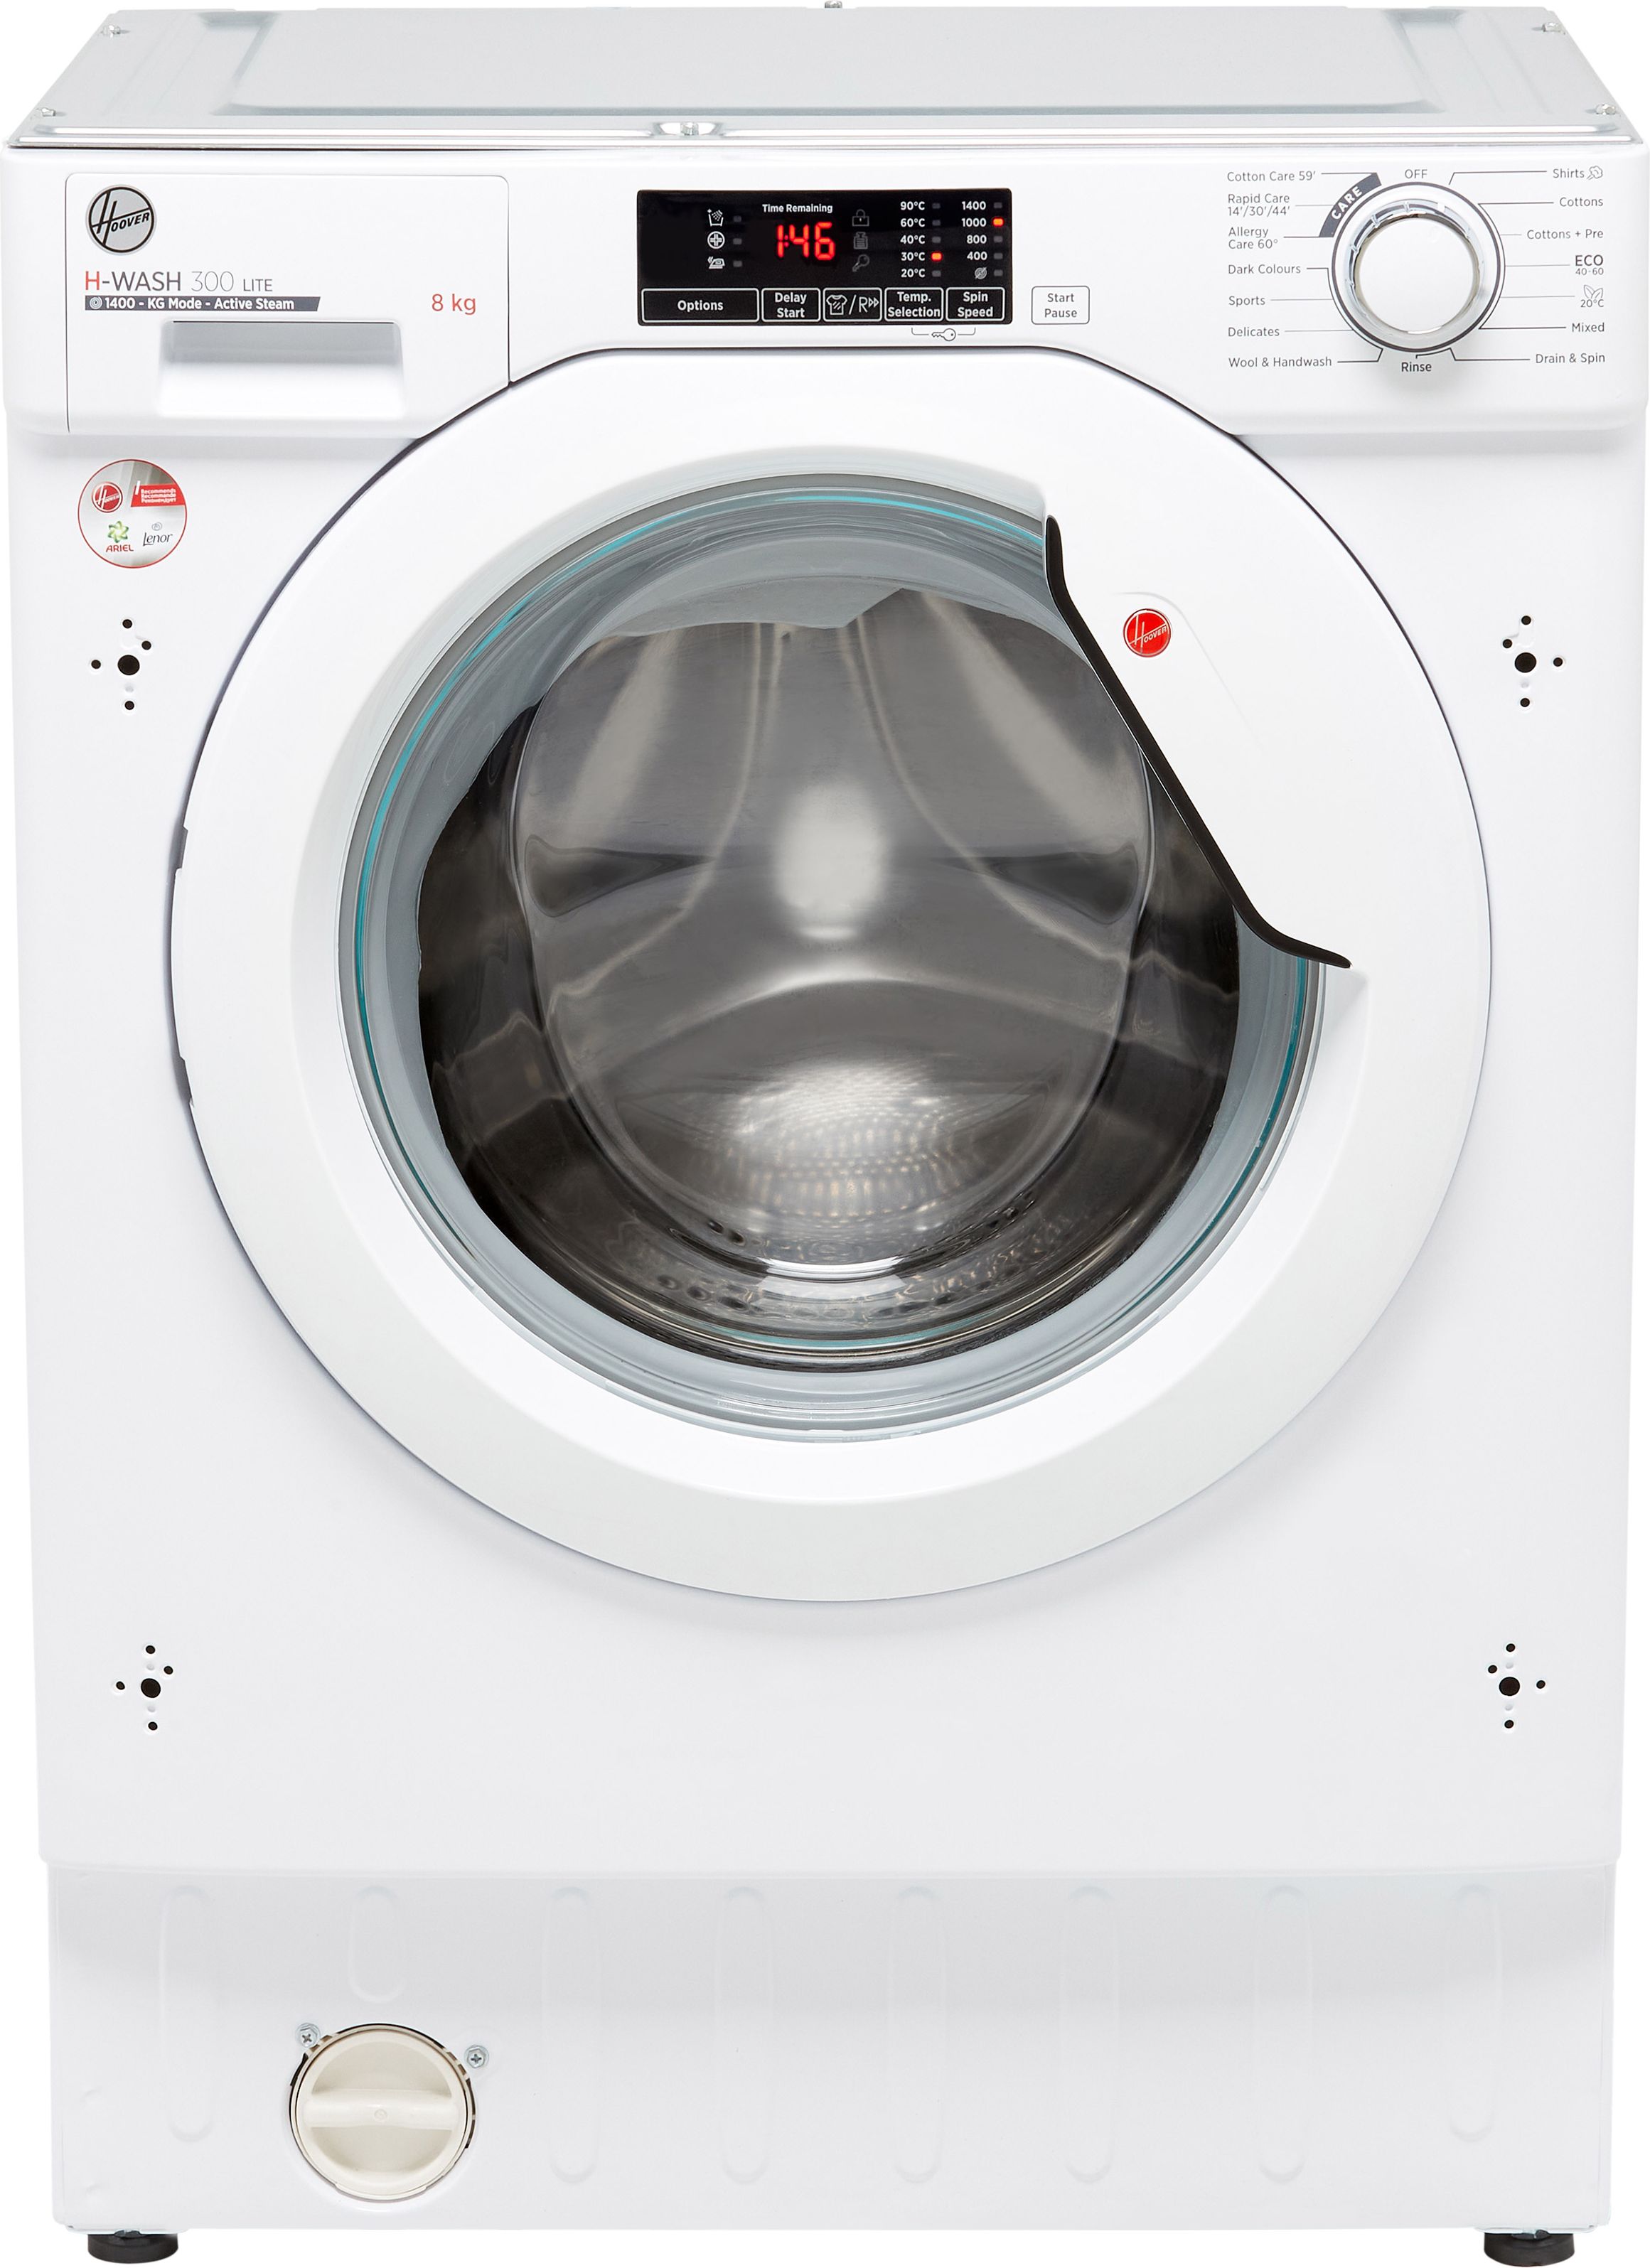 Hoover H-WASH 300 HBWS48D1W4 Integrated 8kg Washing Machine with 1400 rpm - White - B Rated White